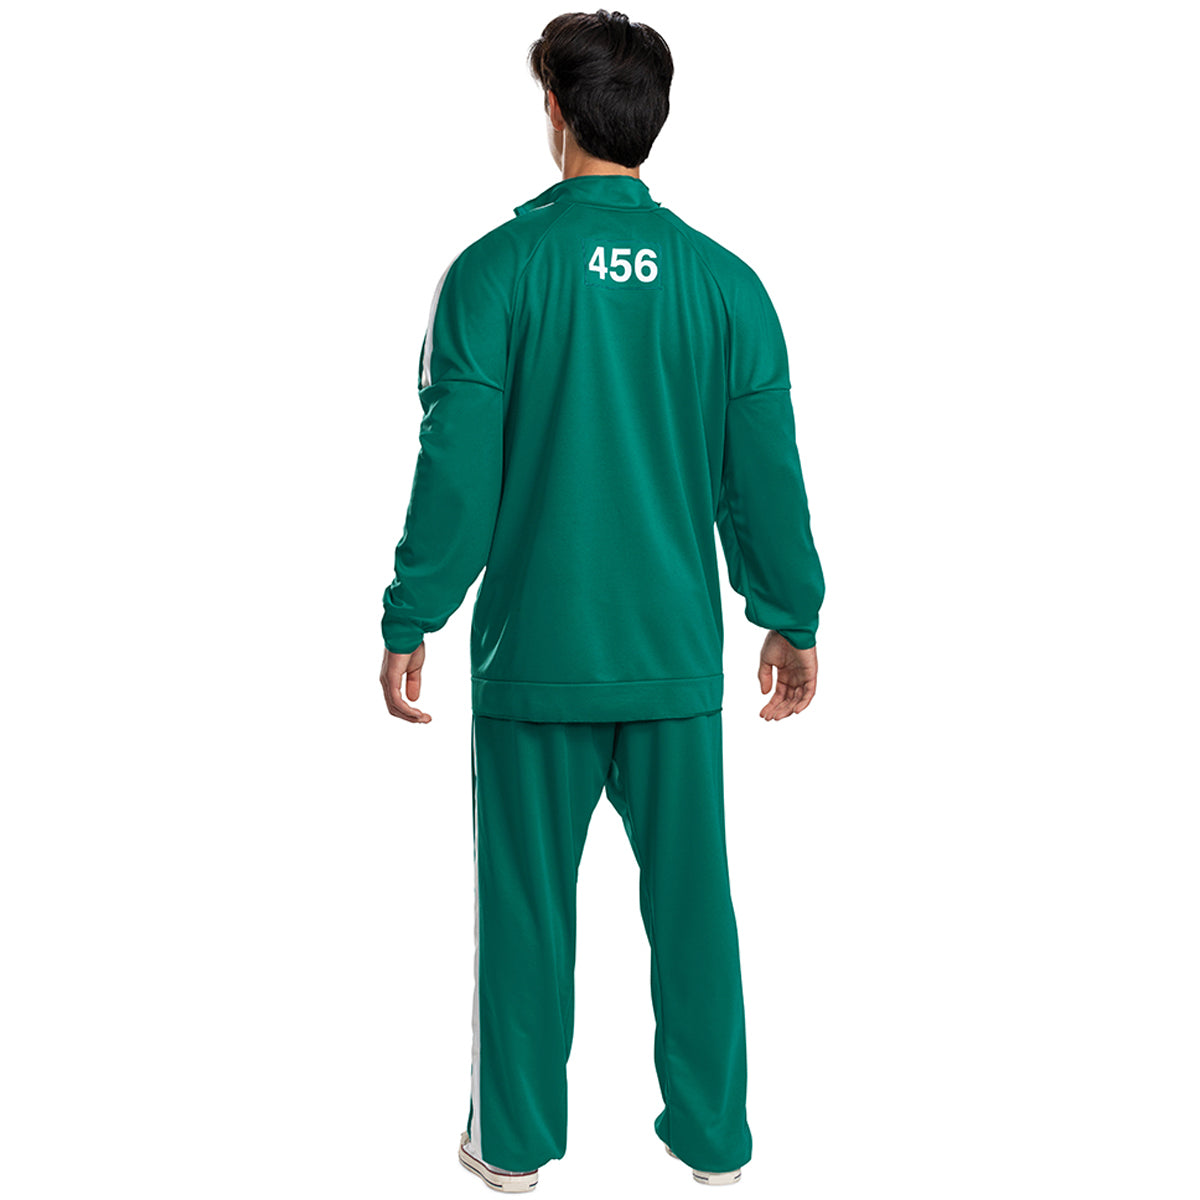 Player 456 Track Suit Disguise  144289TD